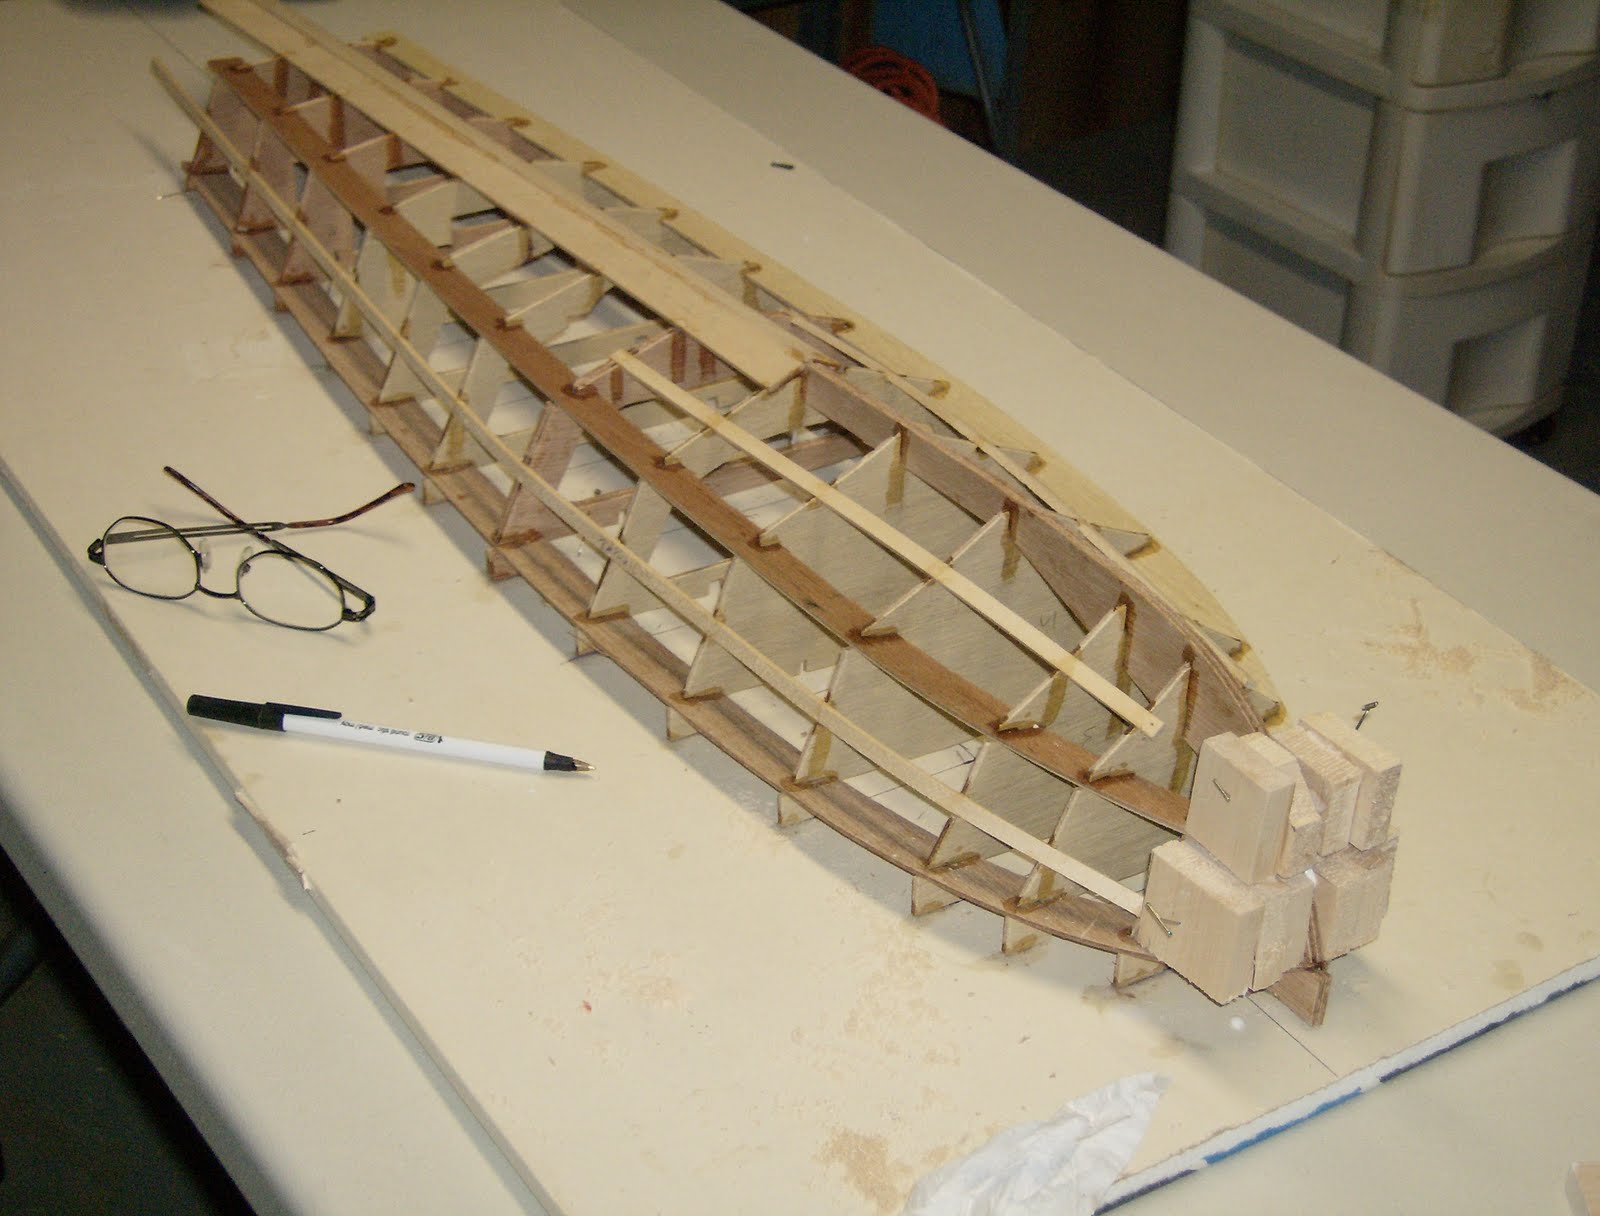 James: Rc Boat Hull Plans How to Building Plans